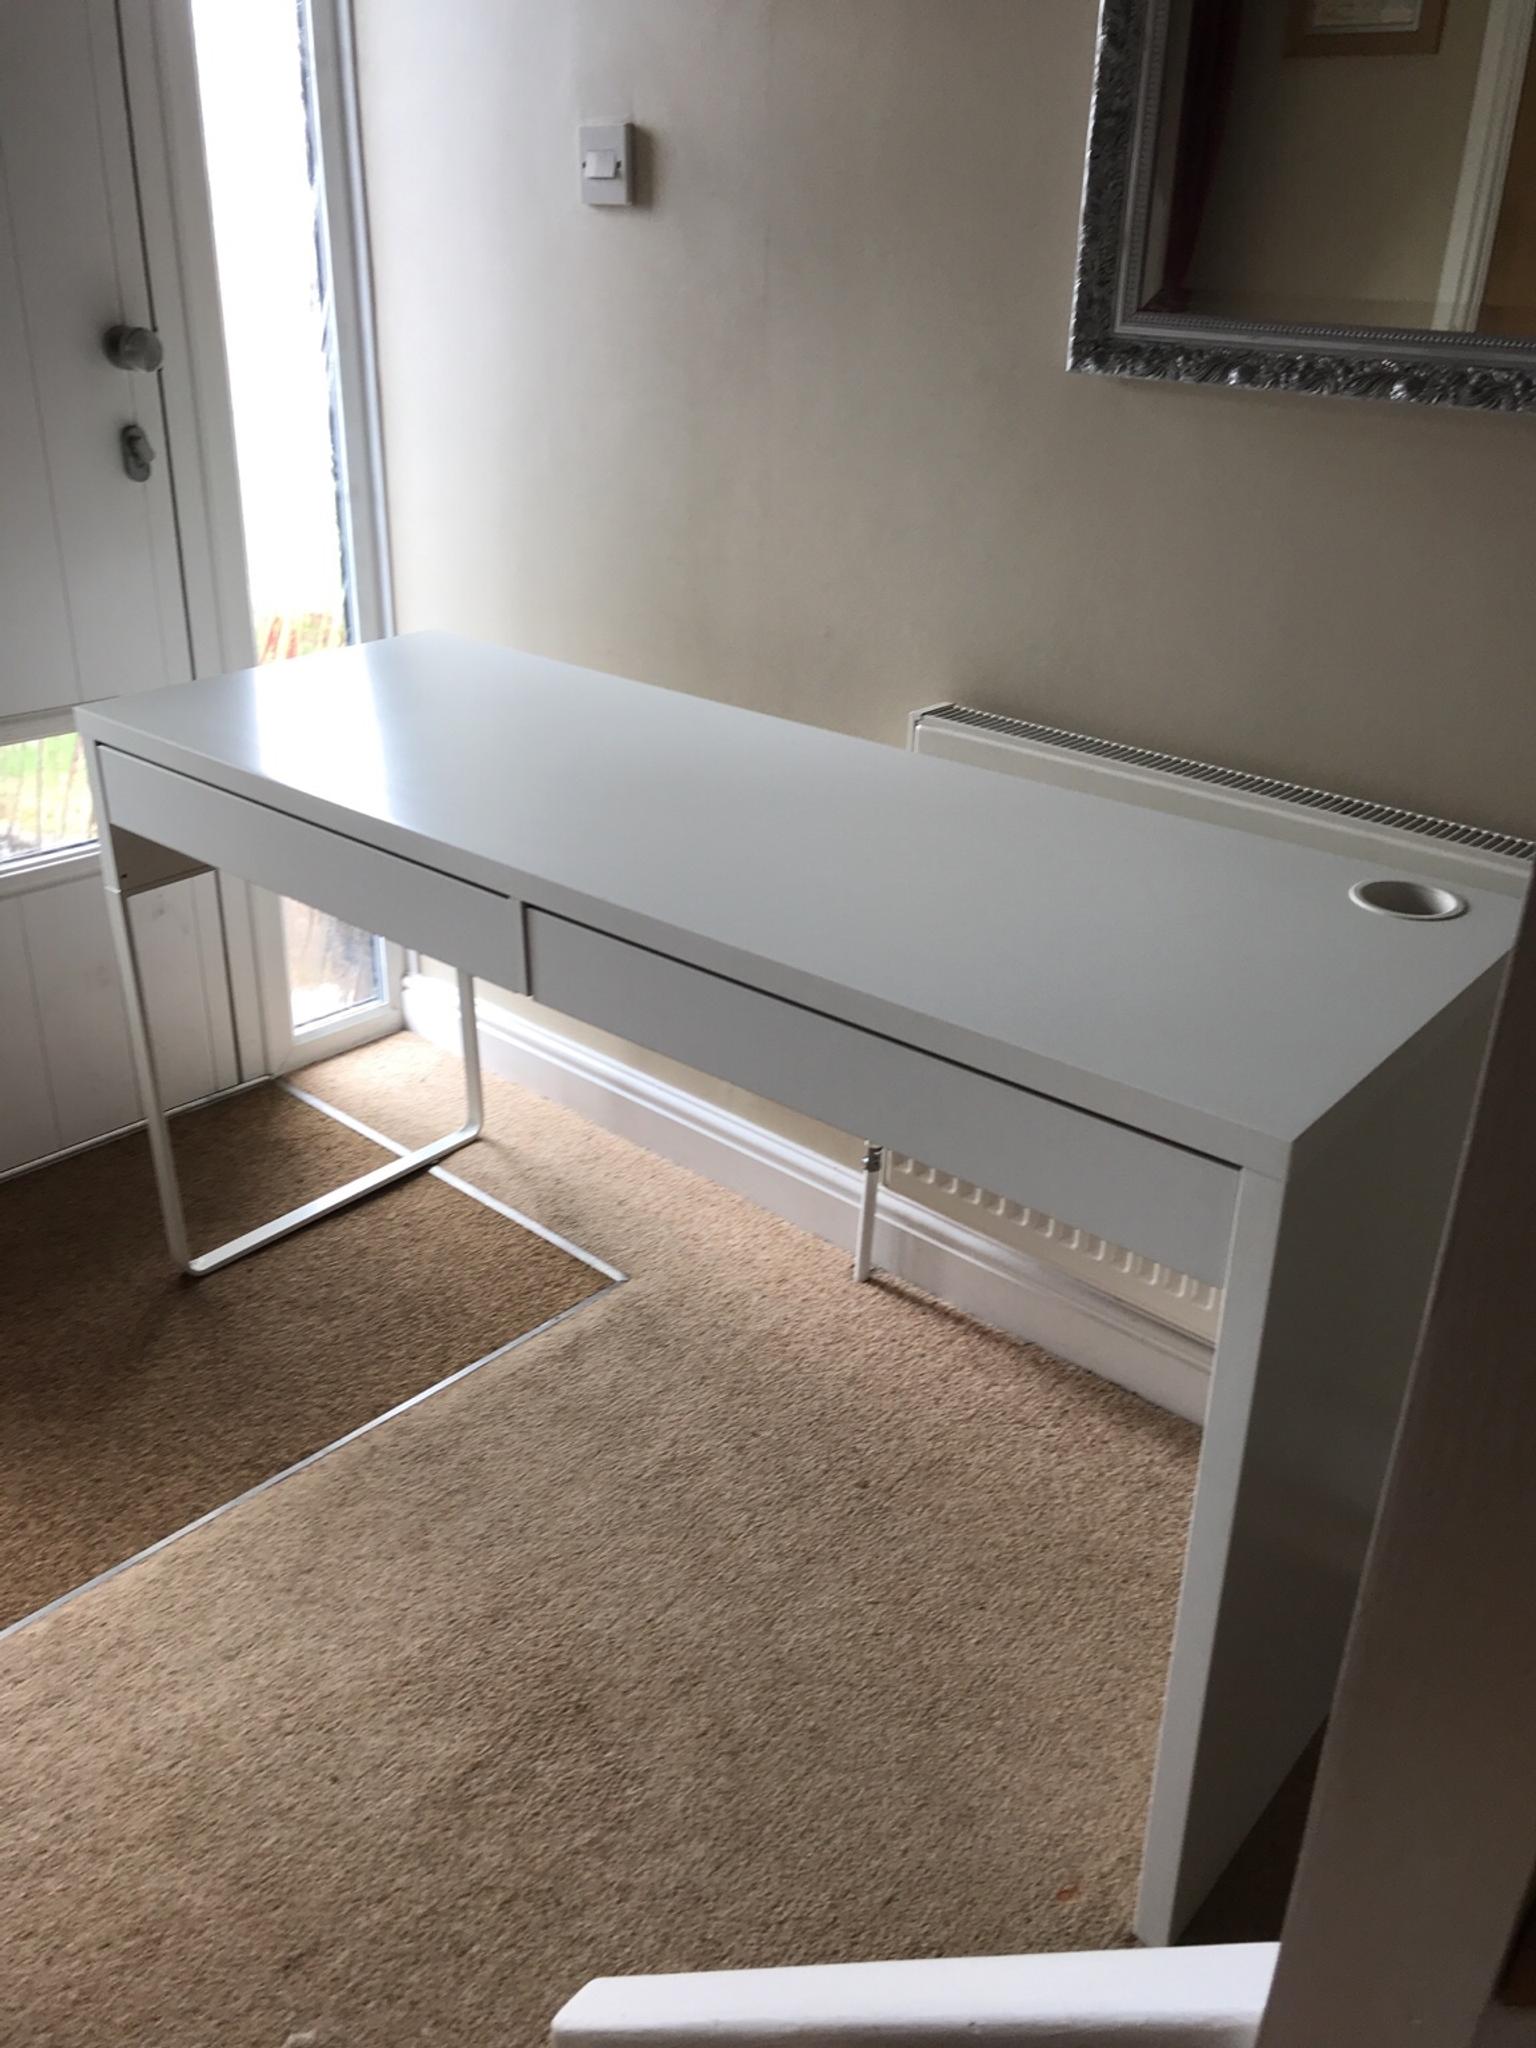 Ikea Micke Desk Table For Computer In Dy8 Dudley For 35 00 For